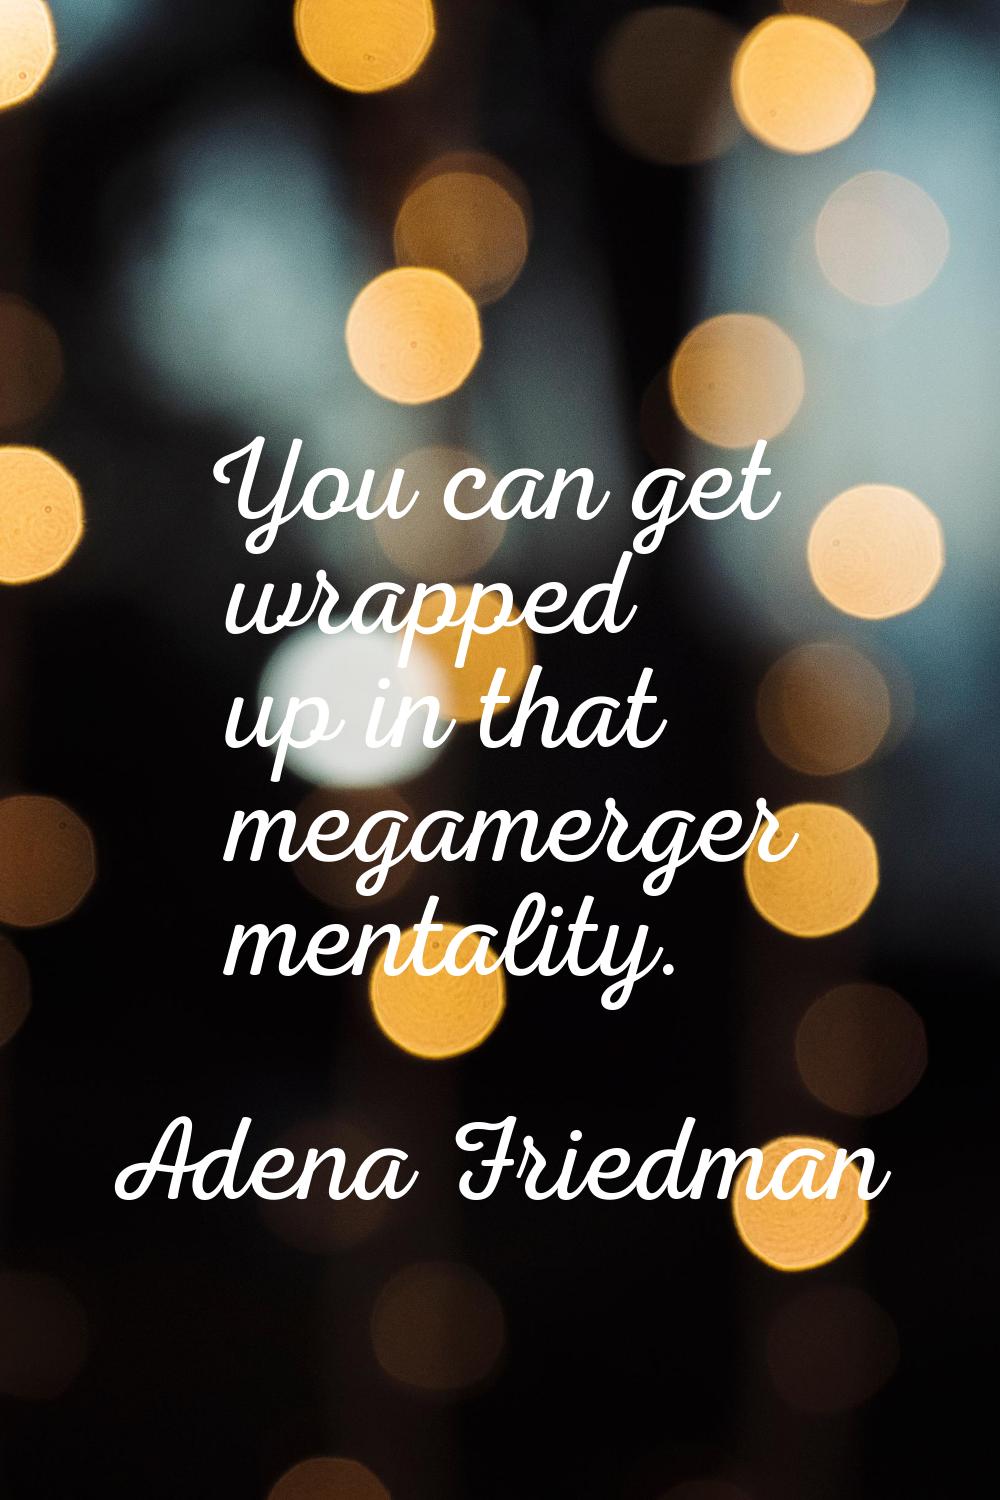 You can get wrapped up in that megamerger mentality.